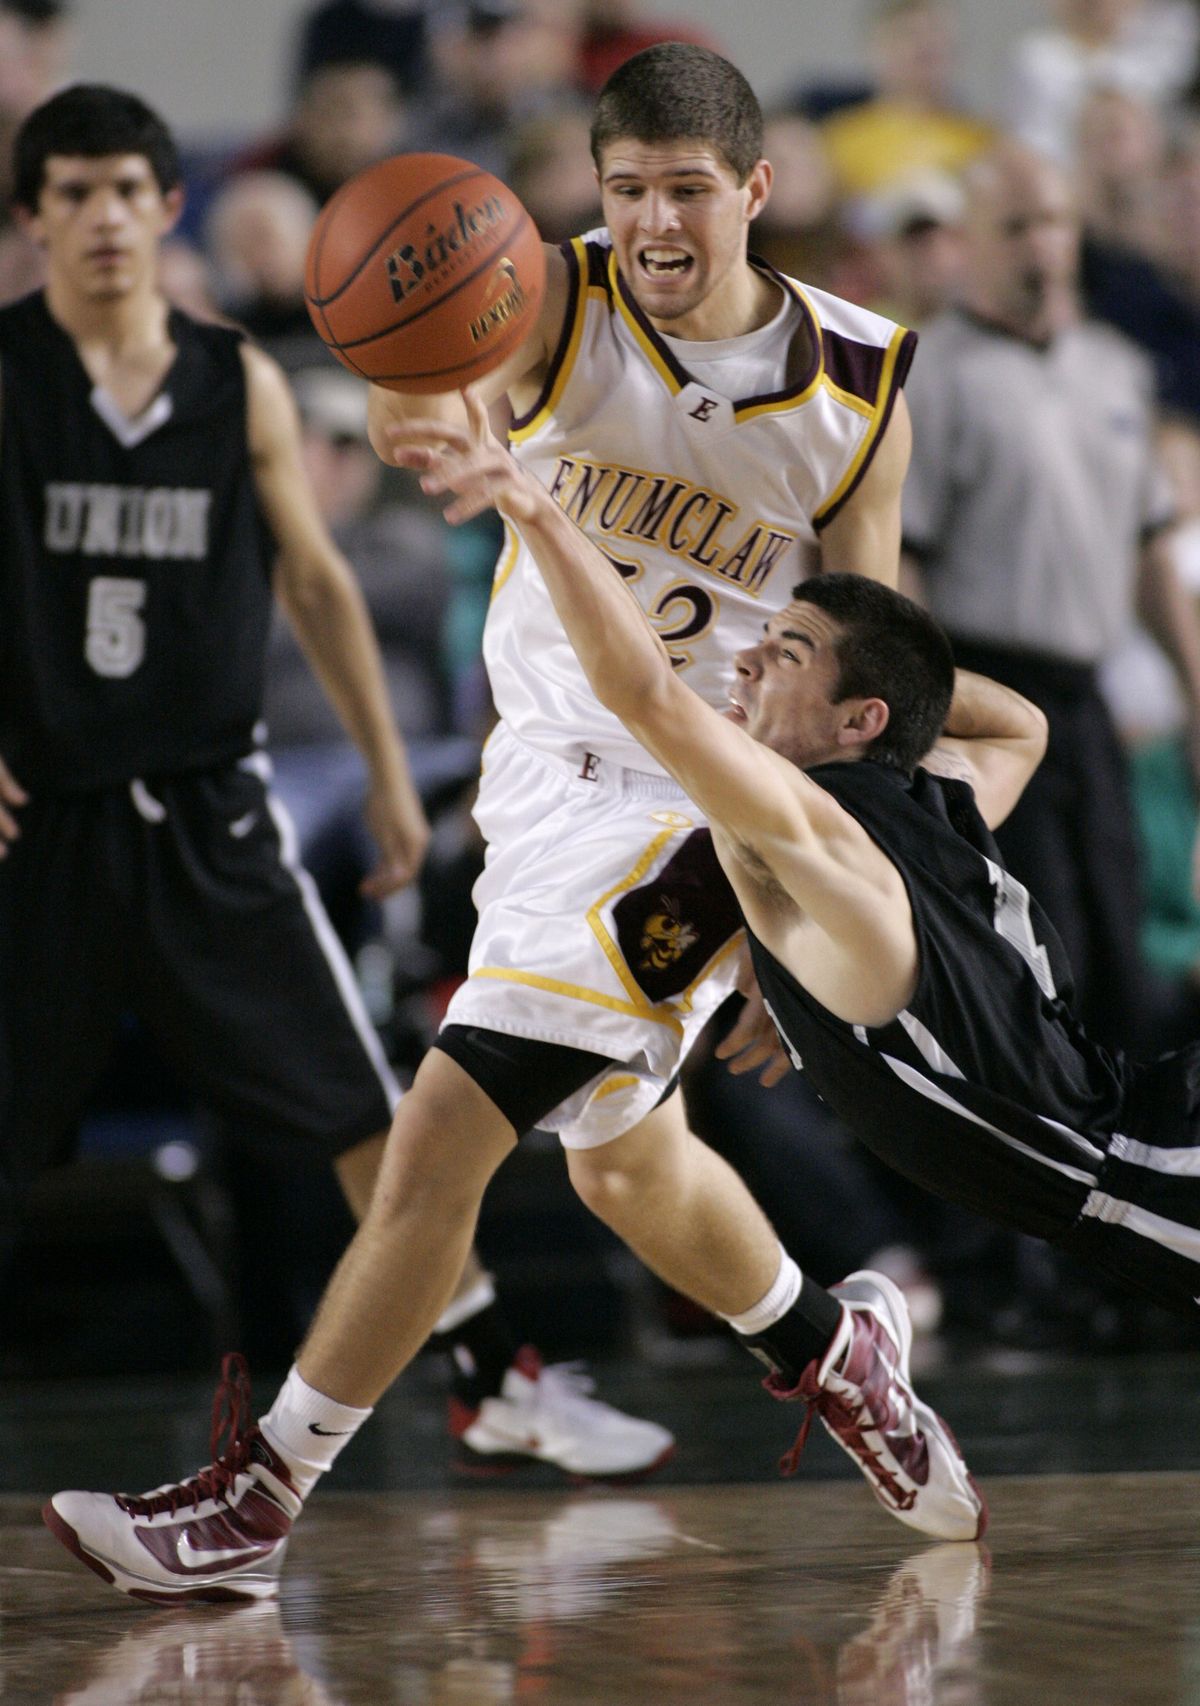 Enumclaw’s Riley Carel grabs the ball while Union’s Chris Morgan comes up short.  (Associated Press)